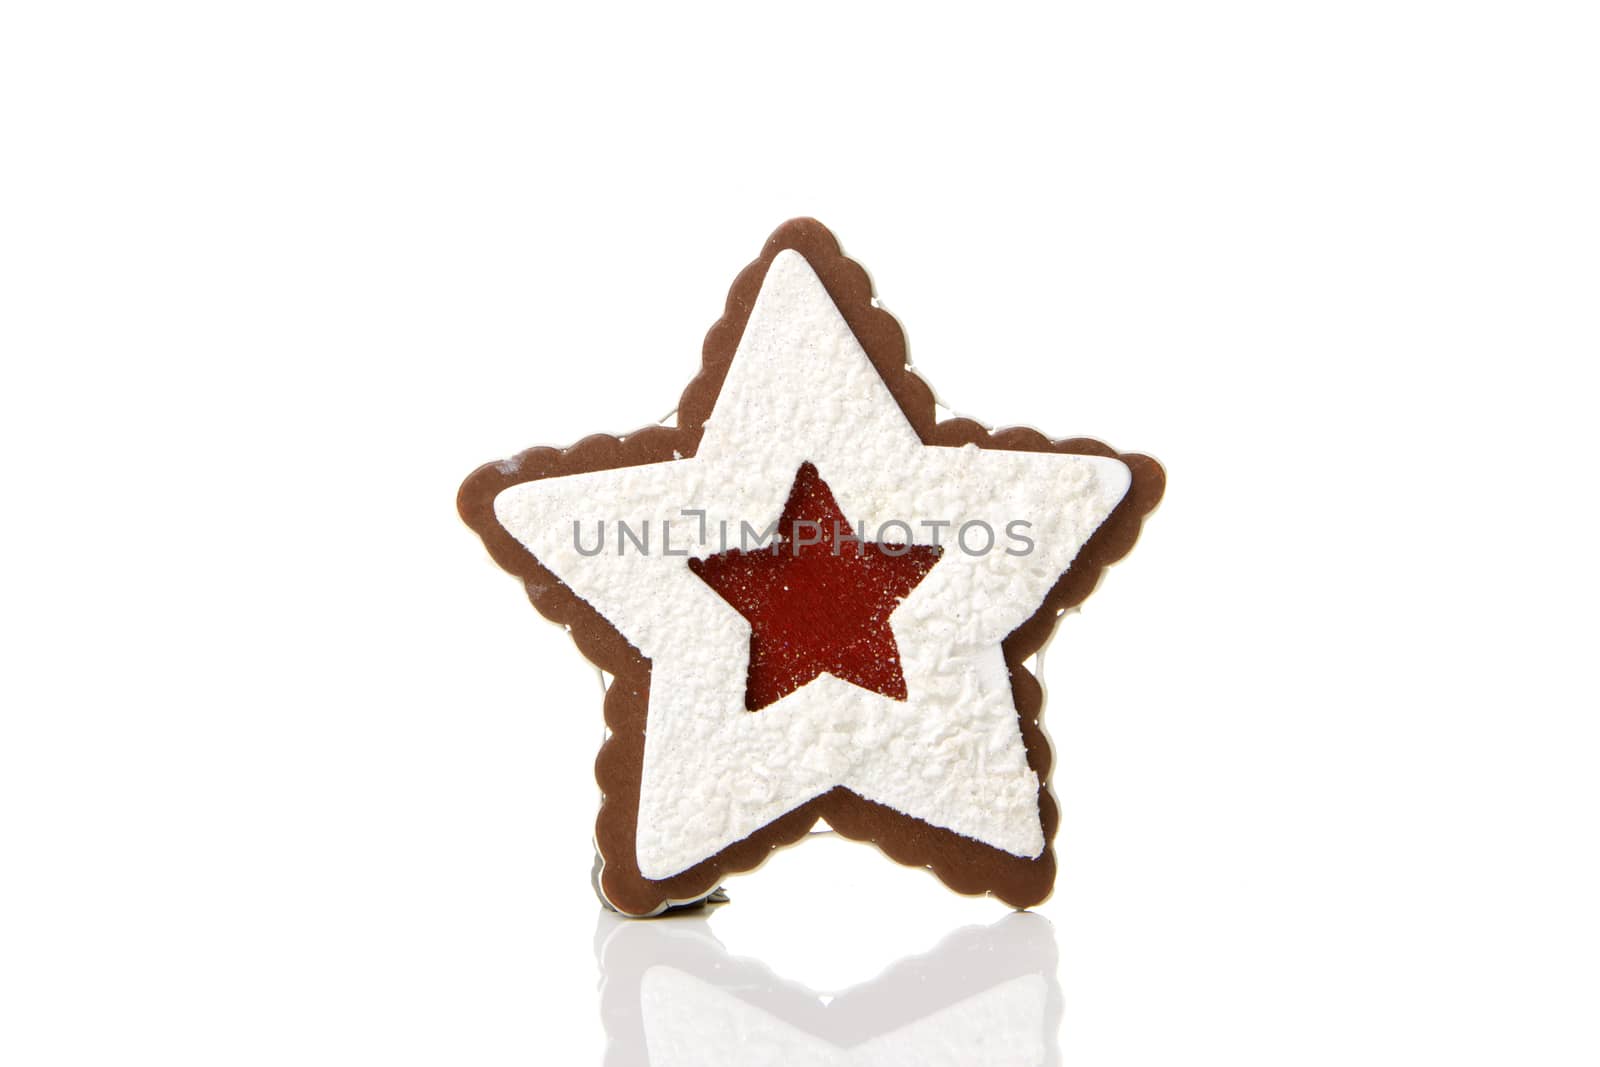 Gingerbread star as a Christmas decoration with white background